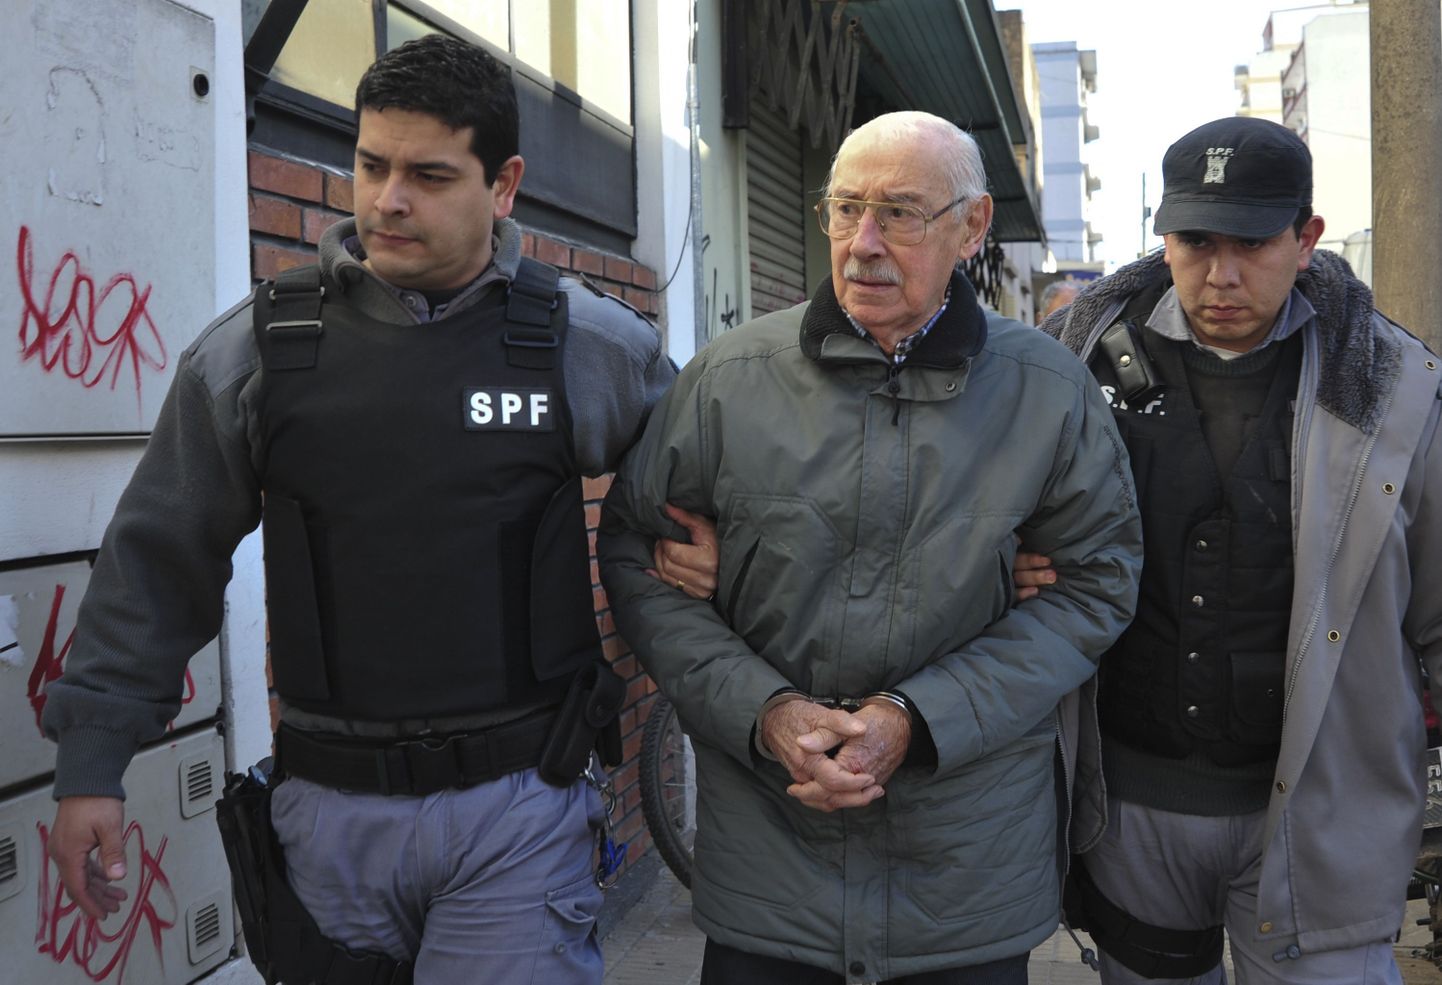 In this photo taken July 13, 2012, former Argentine dictator Jorge Rafael Videla is escorted to a courtroom in Buenos Aires, Argentina, Videla died of natural causes Friday, May 17, 2013, while serving life sentences at the Marcos Paz prison for crimes against humanity. He took power in a 1976 coup and led a military junta that killed thousands of his fellow citizens in a dirty war to eliminate "subversives." Videla was 87. (AP Photo/Enrique Garcia Medina) / SCANPIX Code: 436